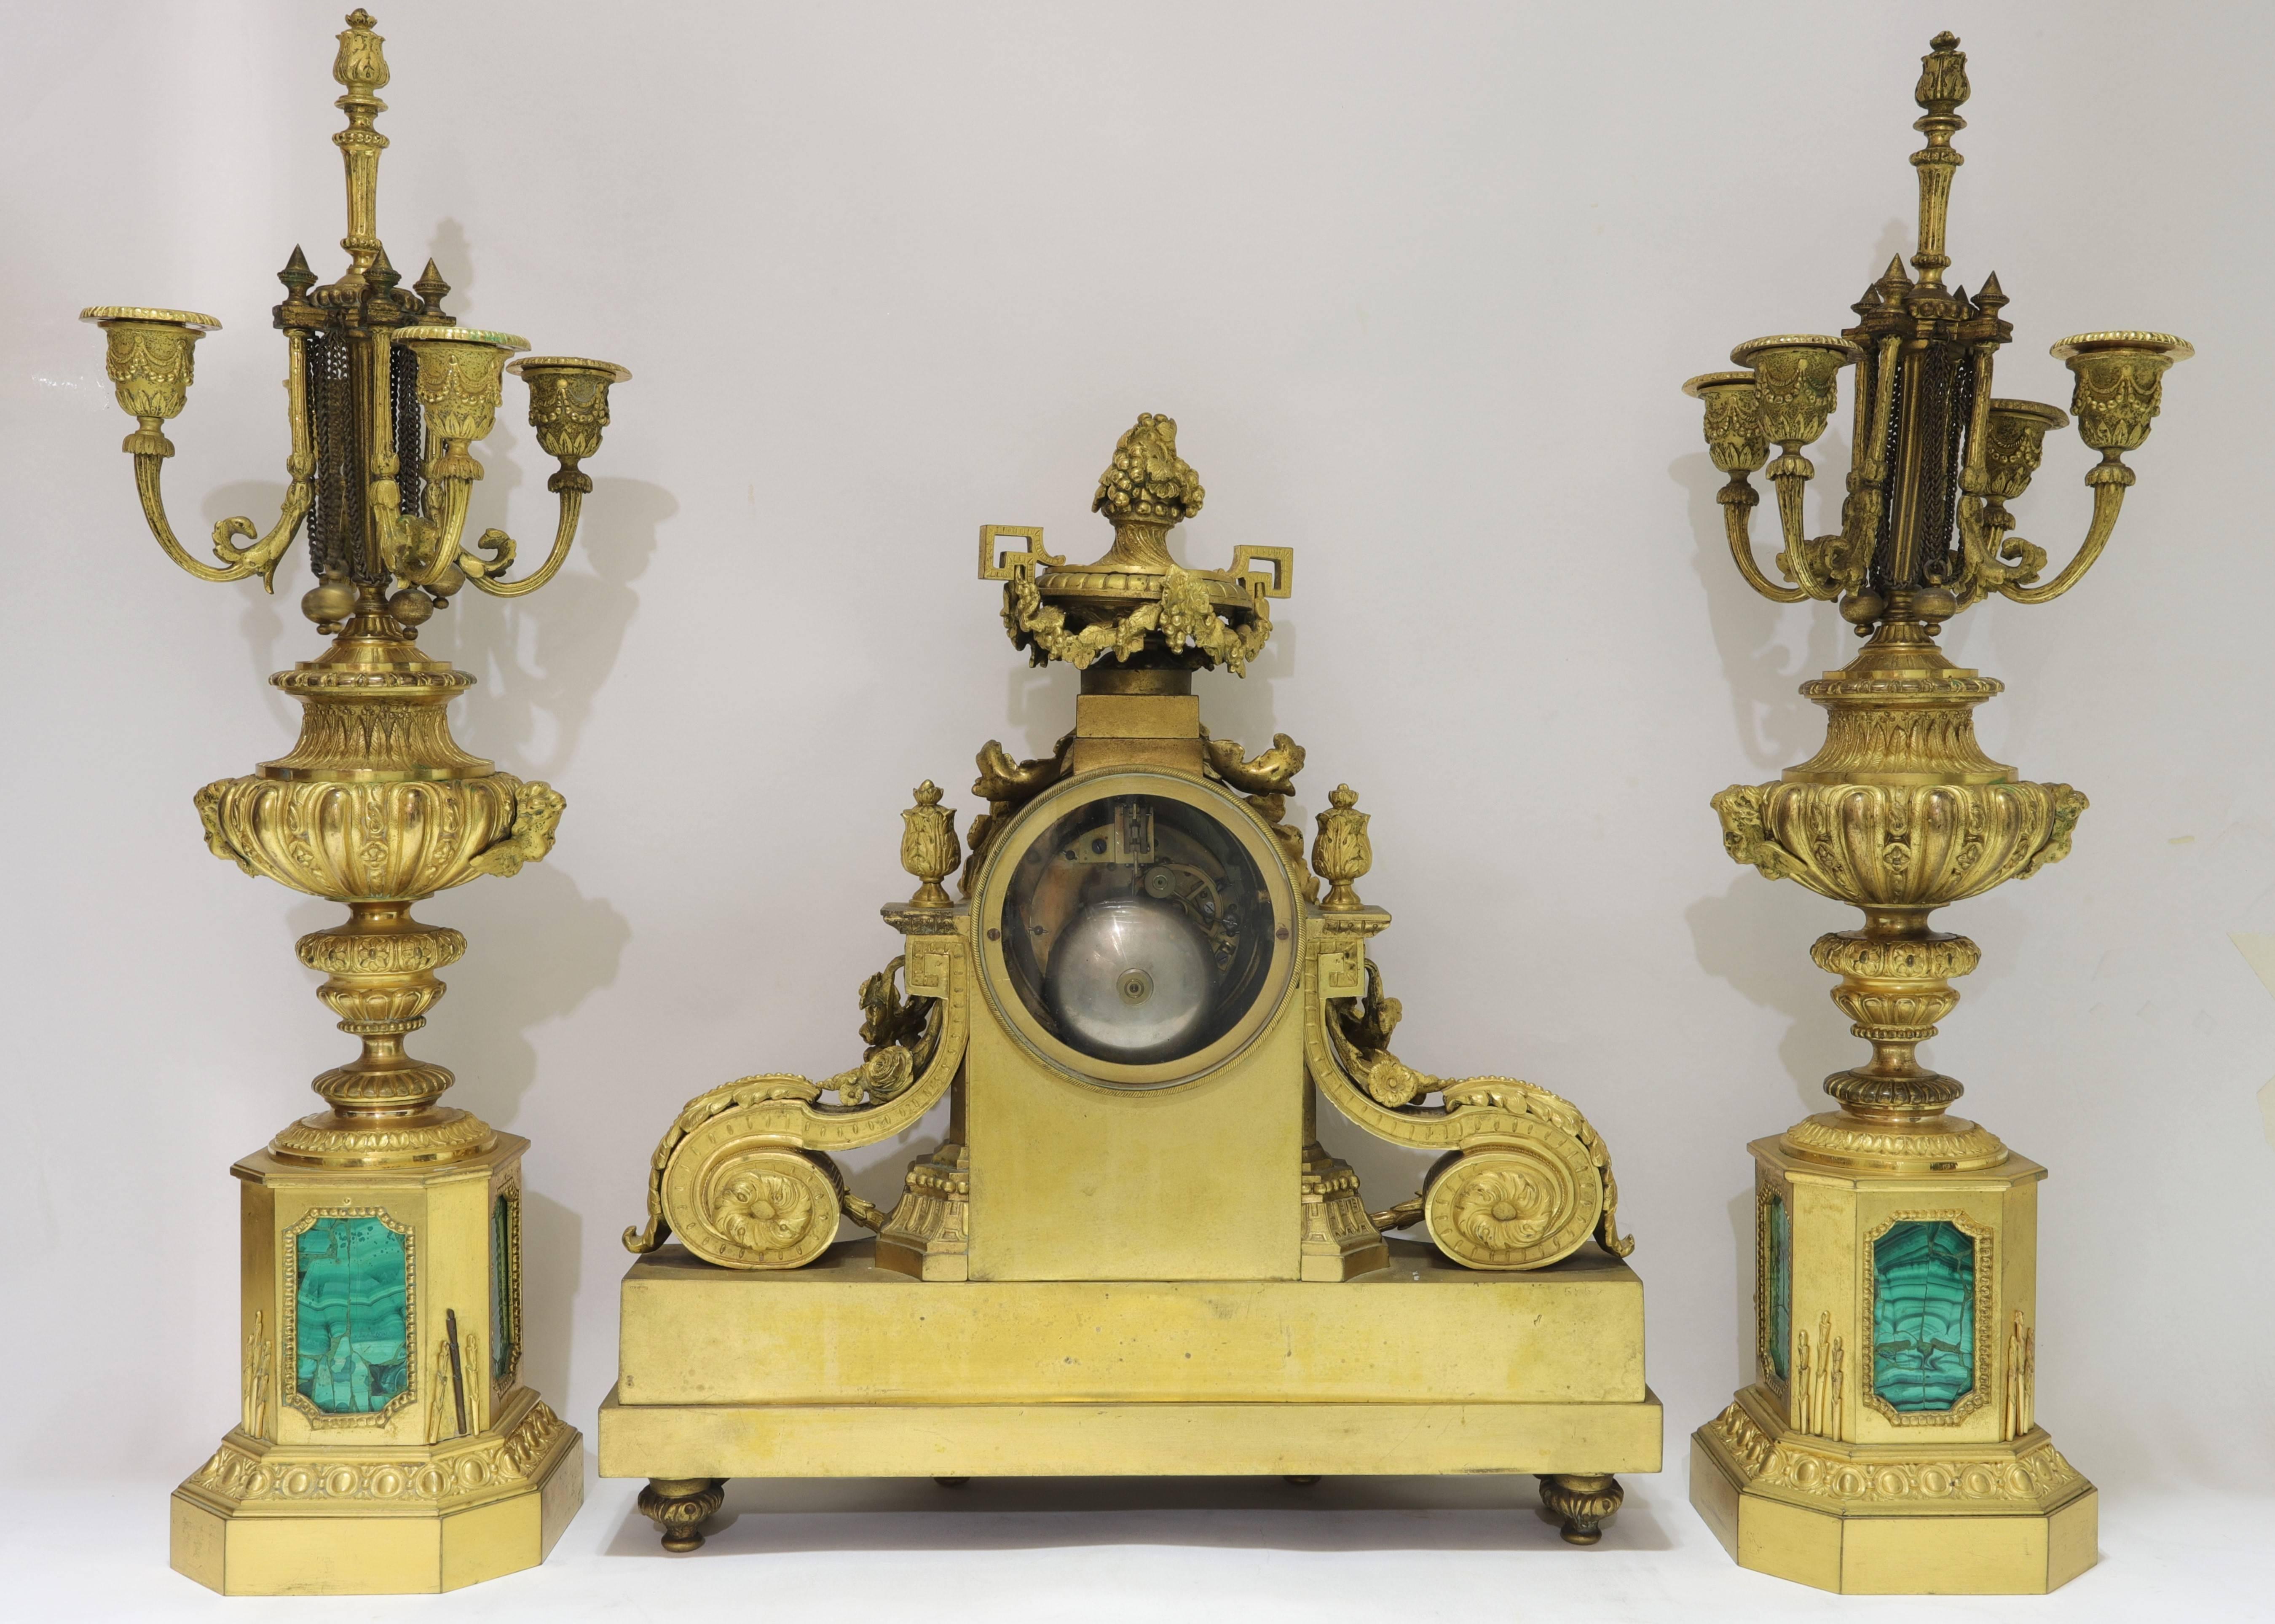 Very fine quality Louis XVI style gilt bronze and Malachite three-piece clock and candelabras clock set.
The dial signed